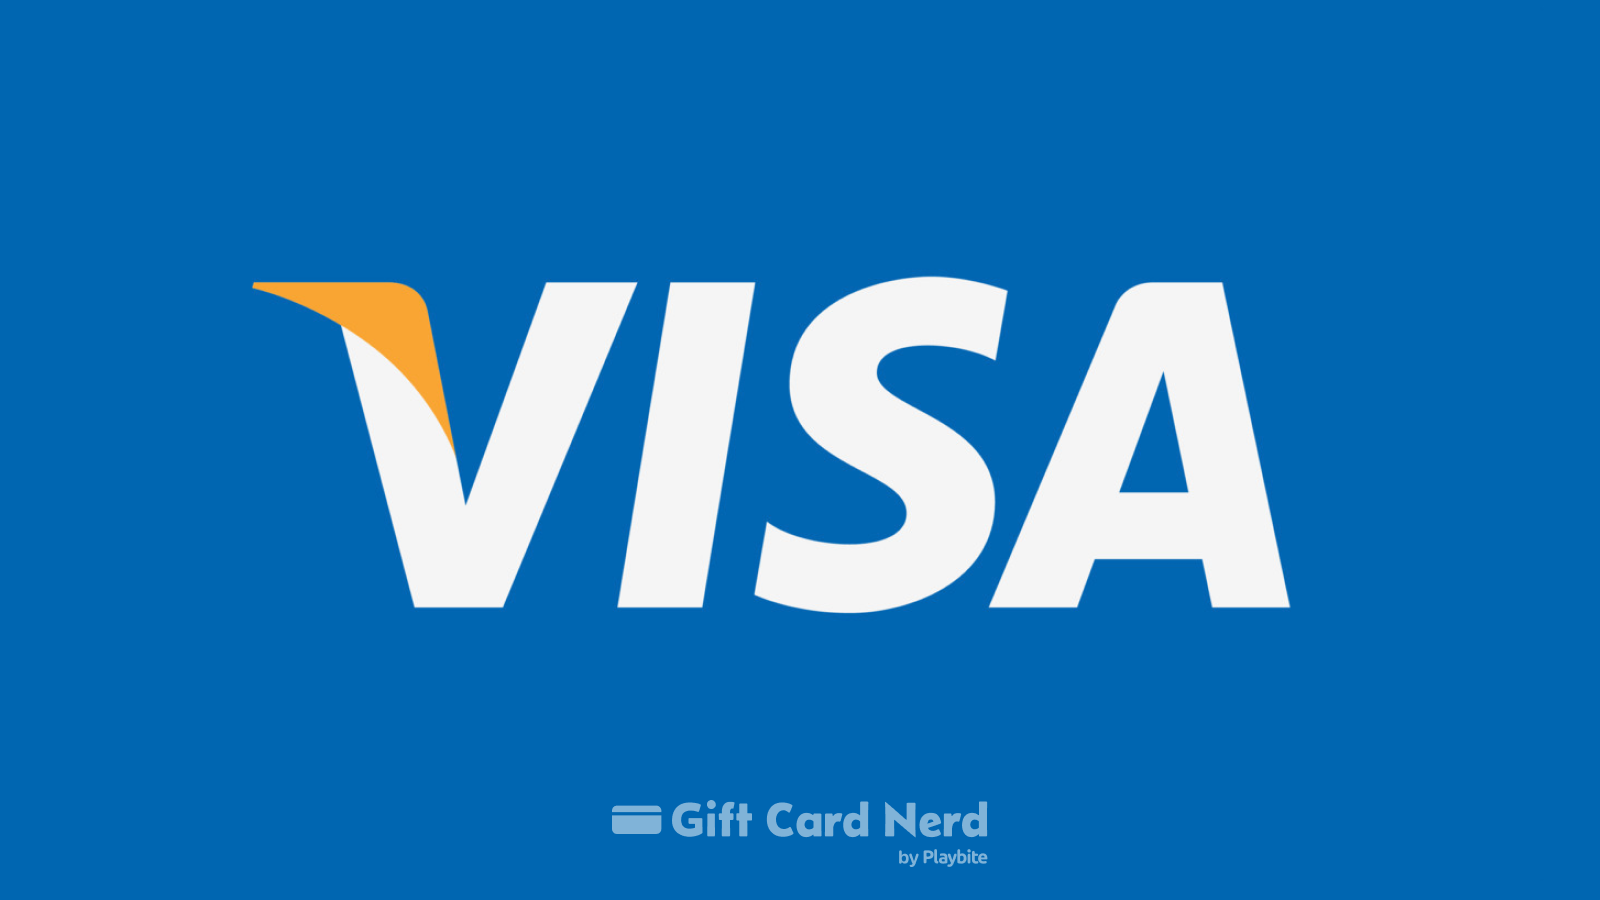 Can You Use a Visa Gift Card on Venmo?